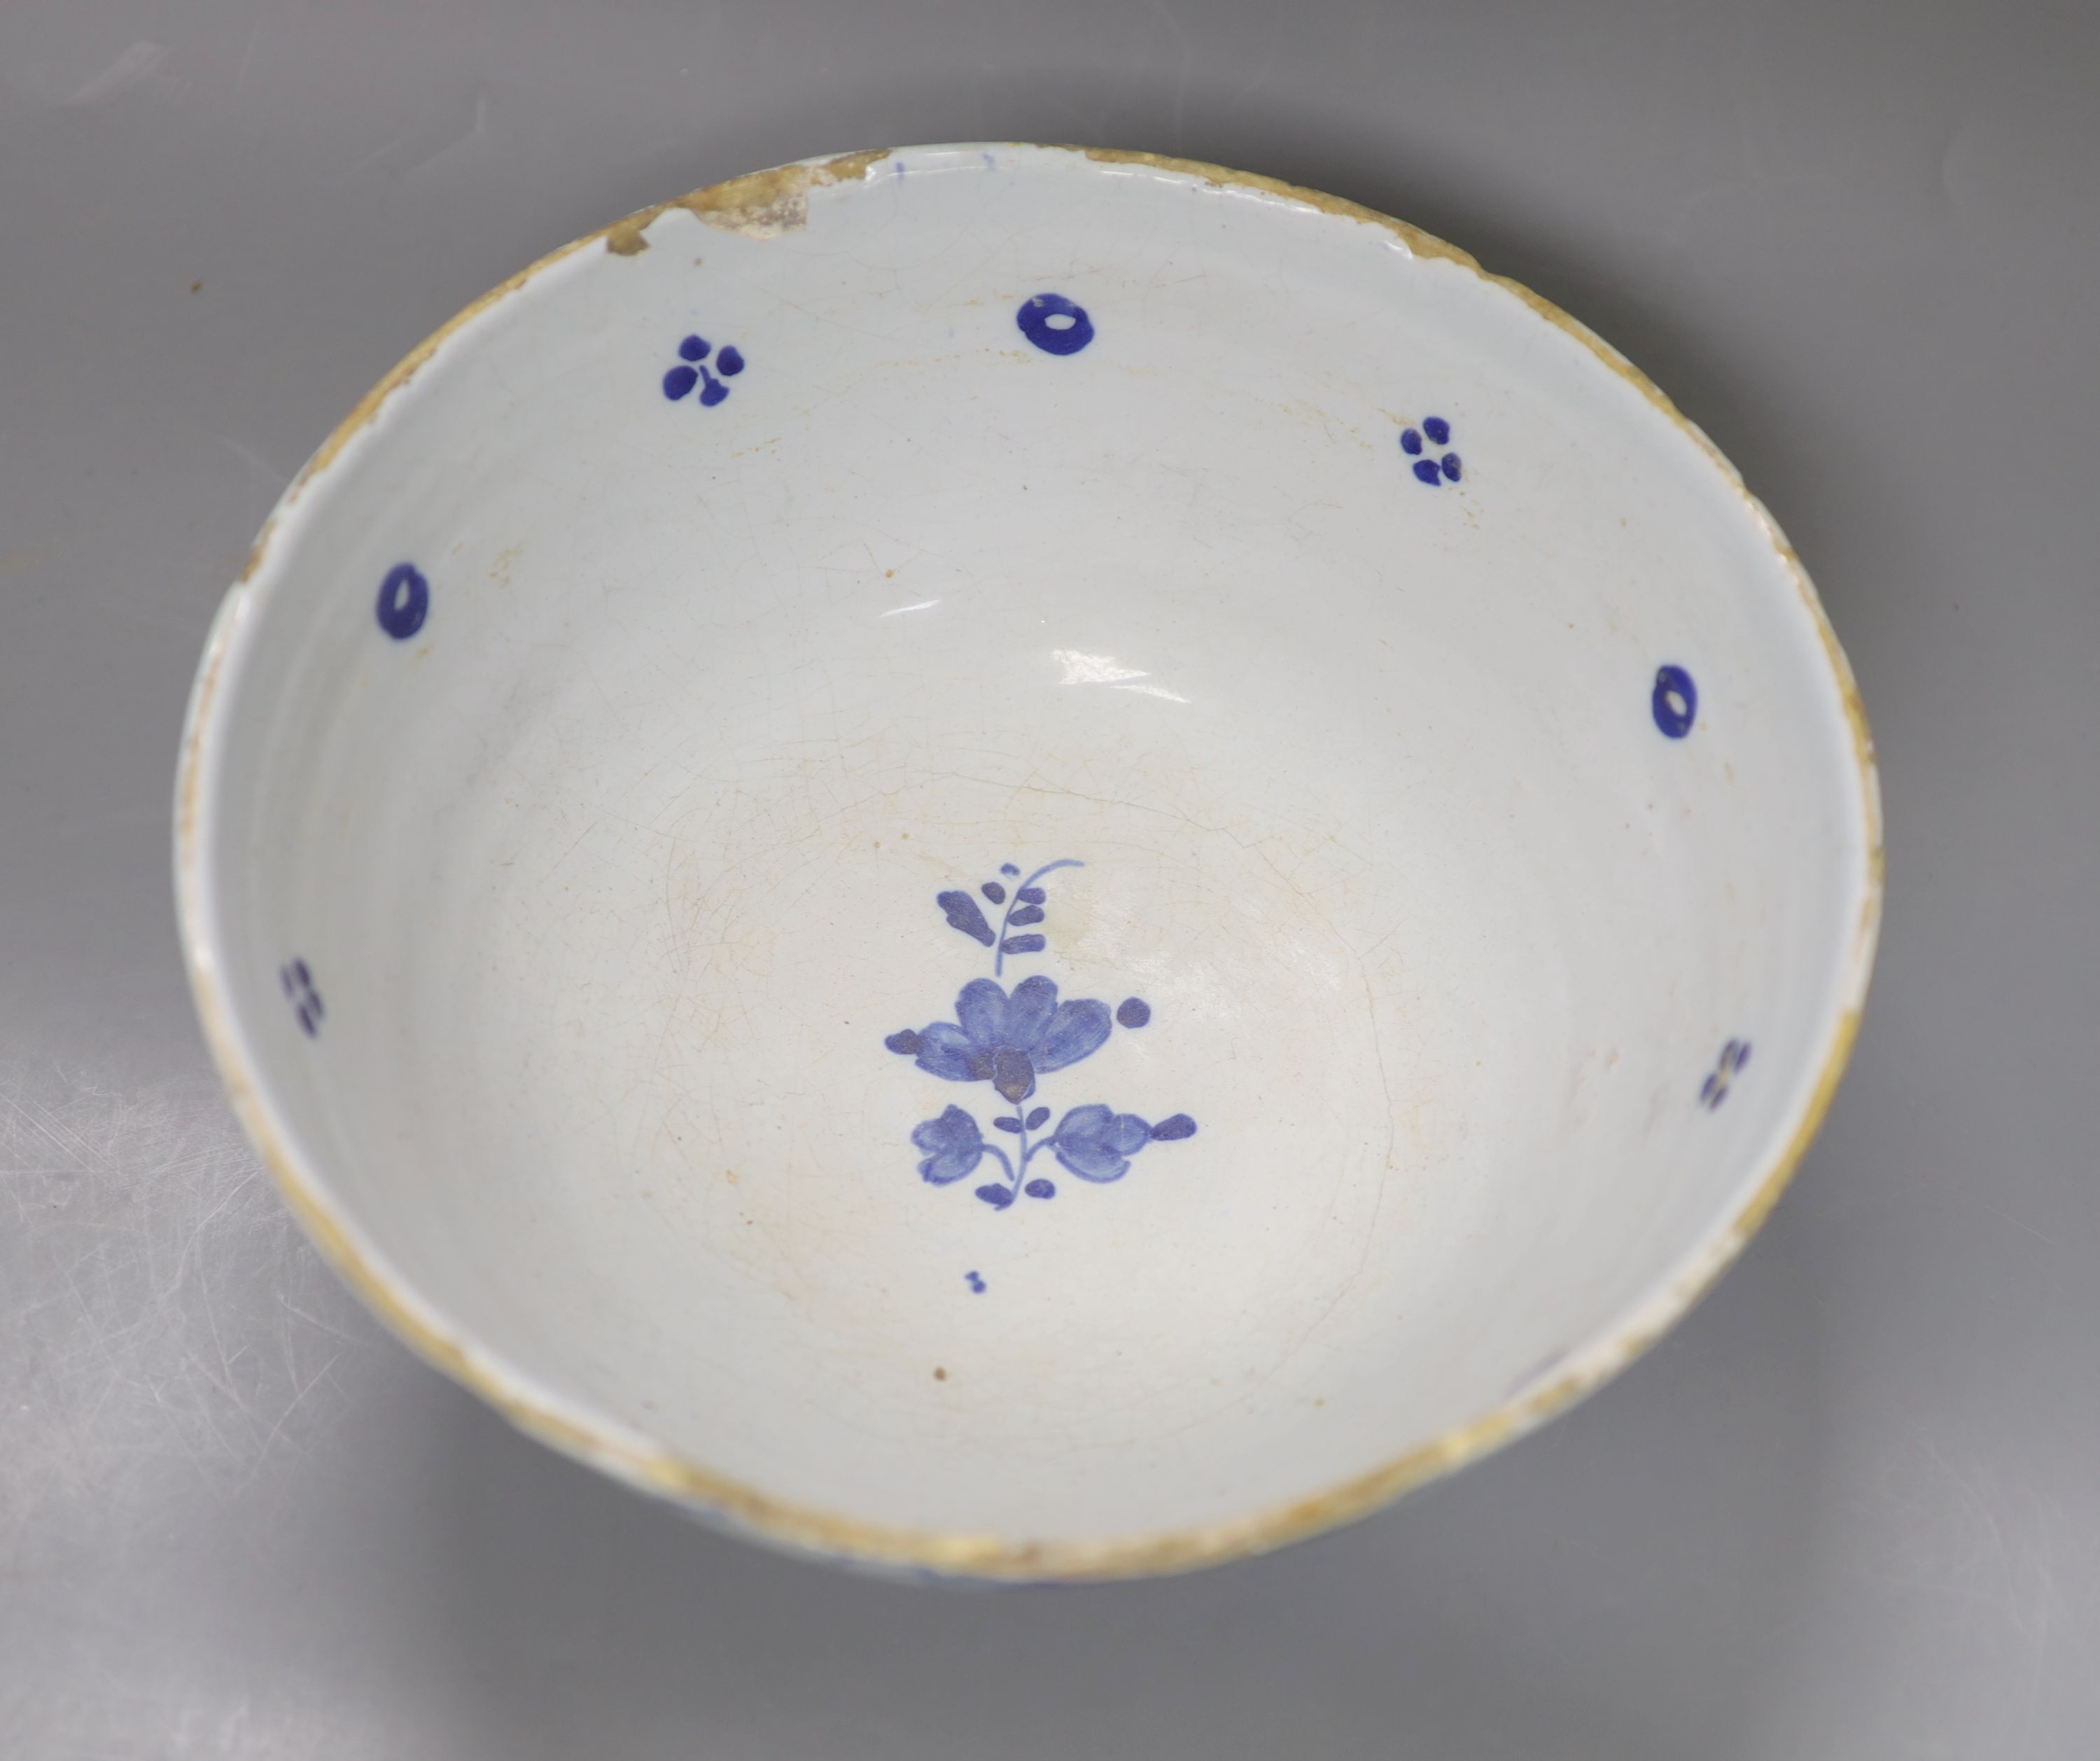 An 18th century English Delft punch bowl, diameter 26cmCONDITION: Bowl - obvious damage includes - Image 4 of 5